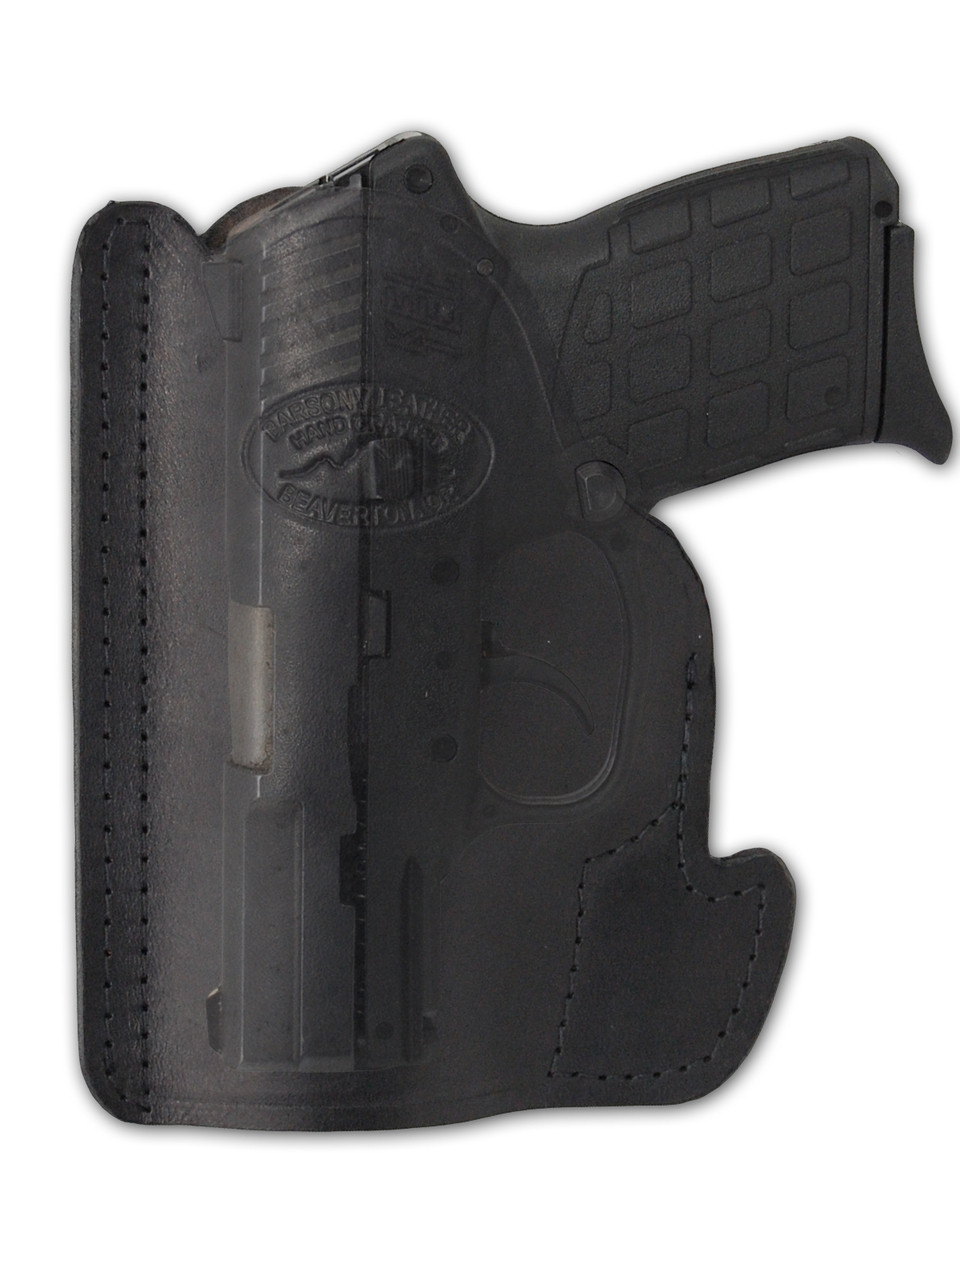 Black Leather Ambidextrous Pocket Holster for Compact 9mm 40 45 Pistols